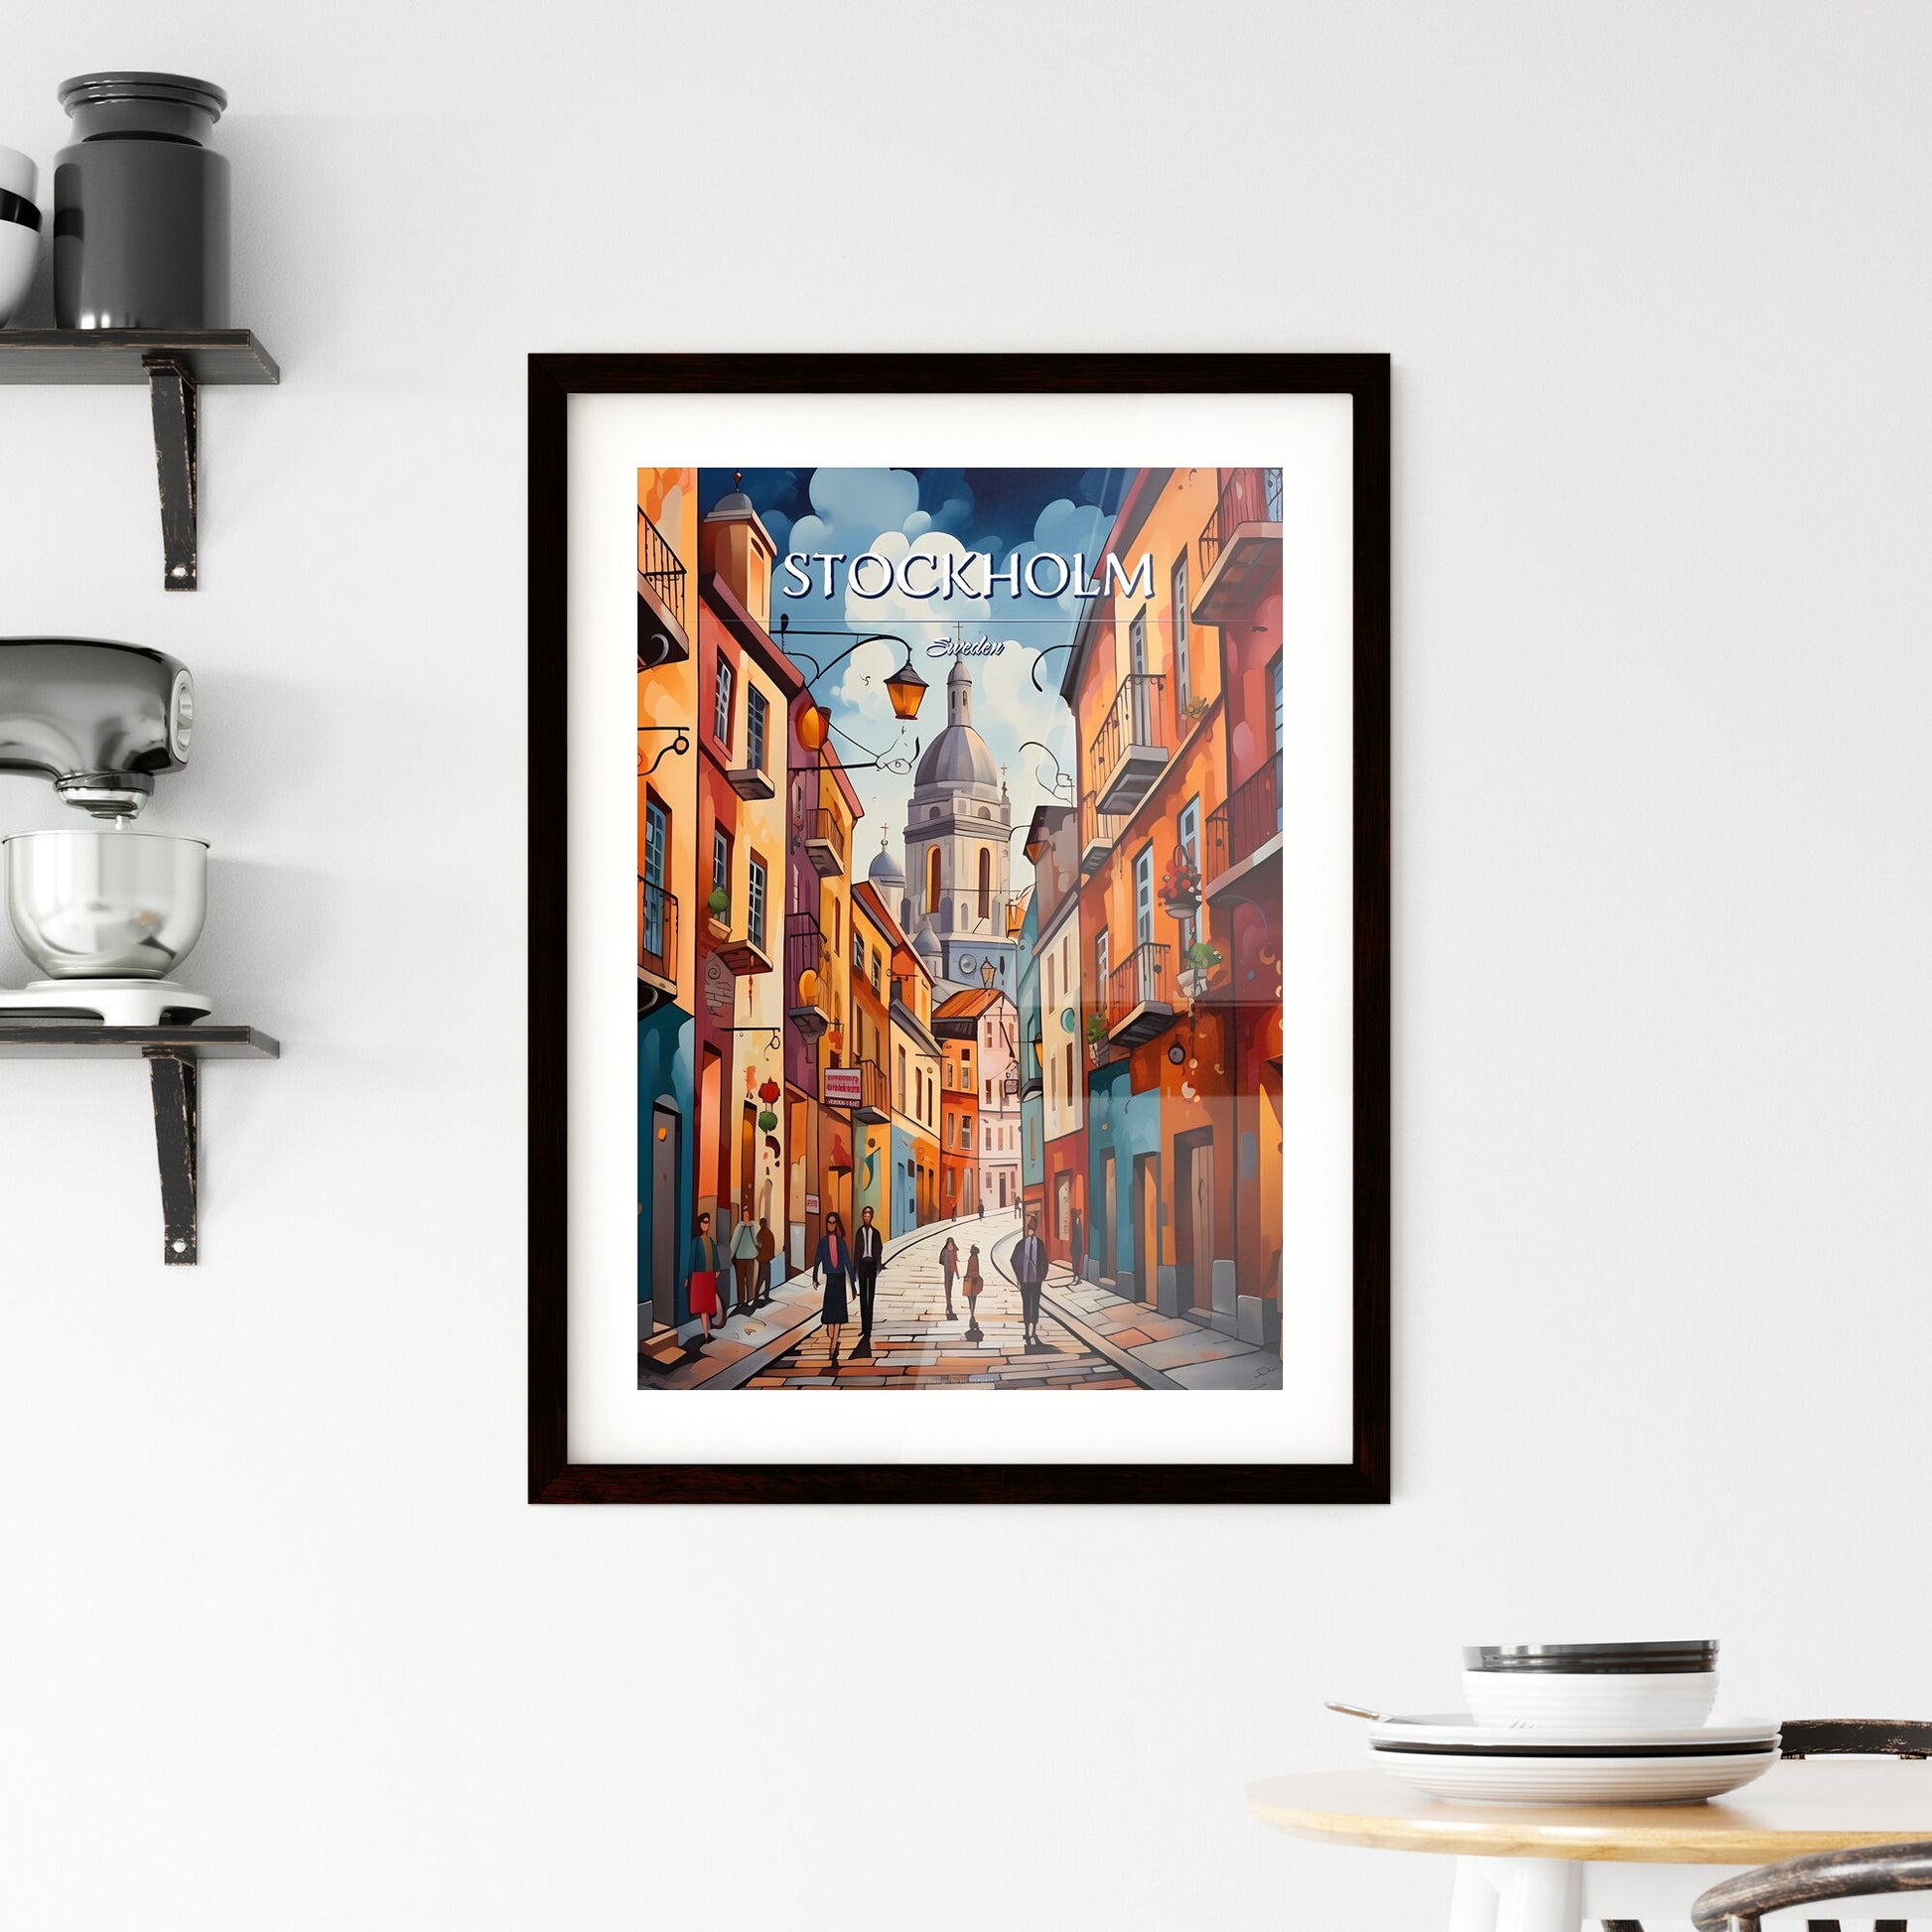 Stockholm, Sweden, - Art print of a man walking on a bridge over a river with a bridge and buildings Default Title